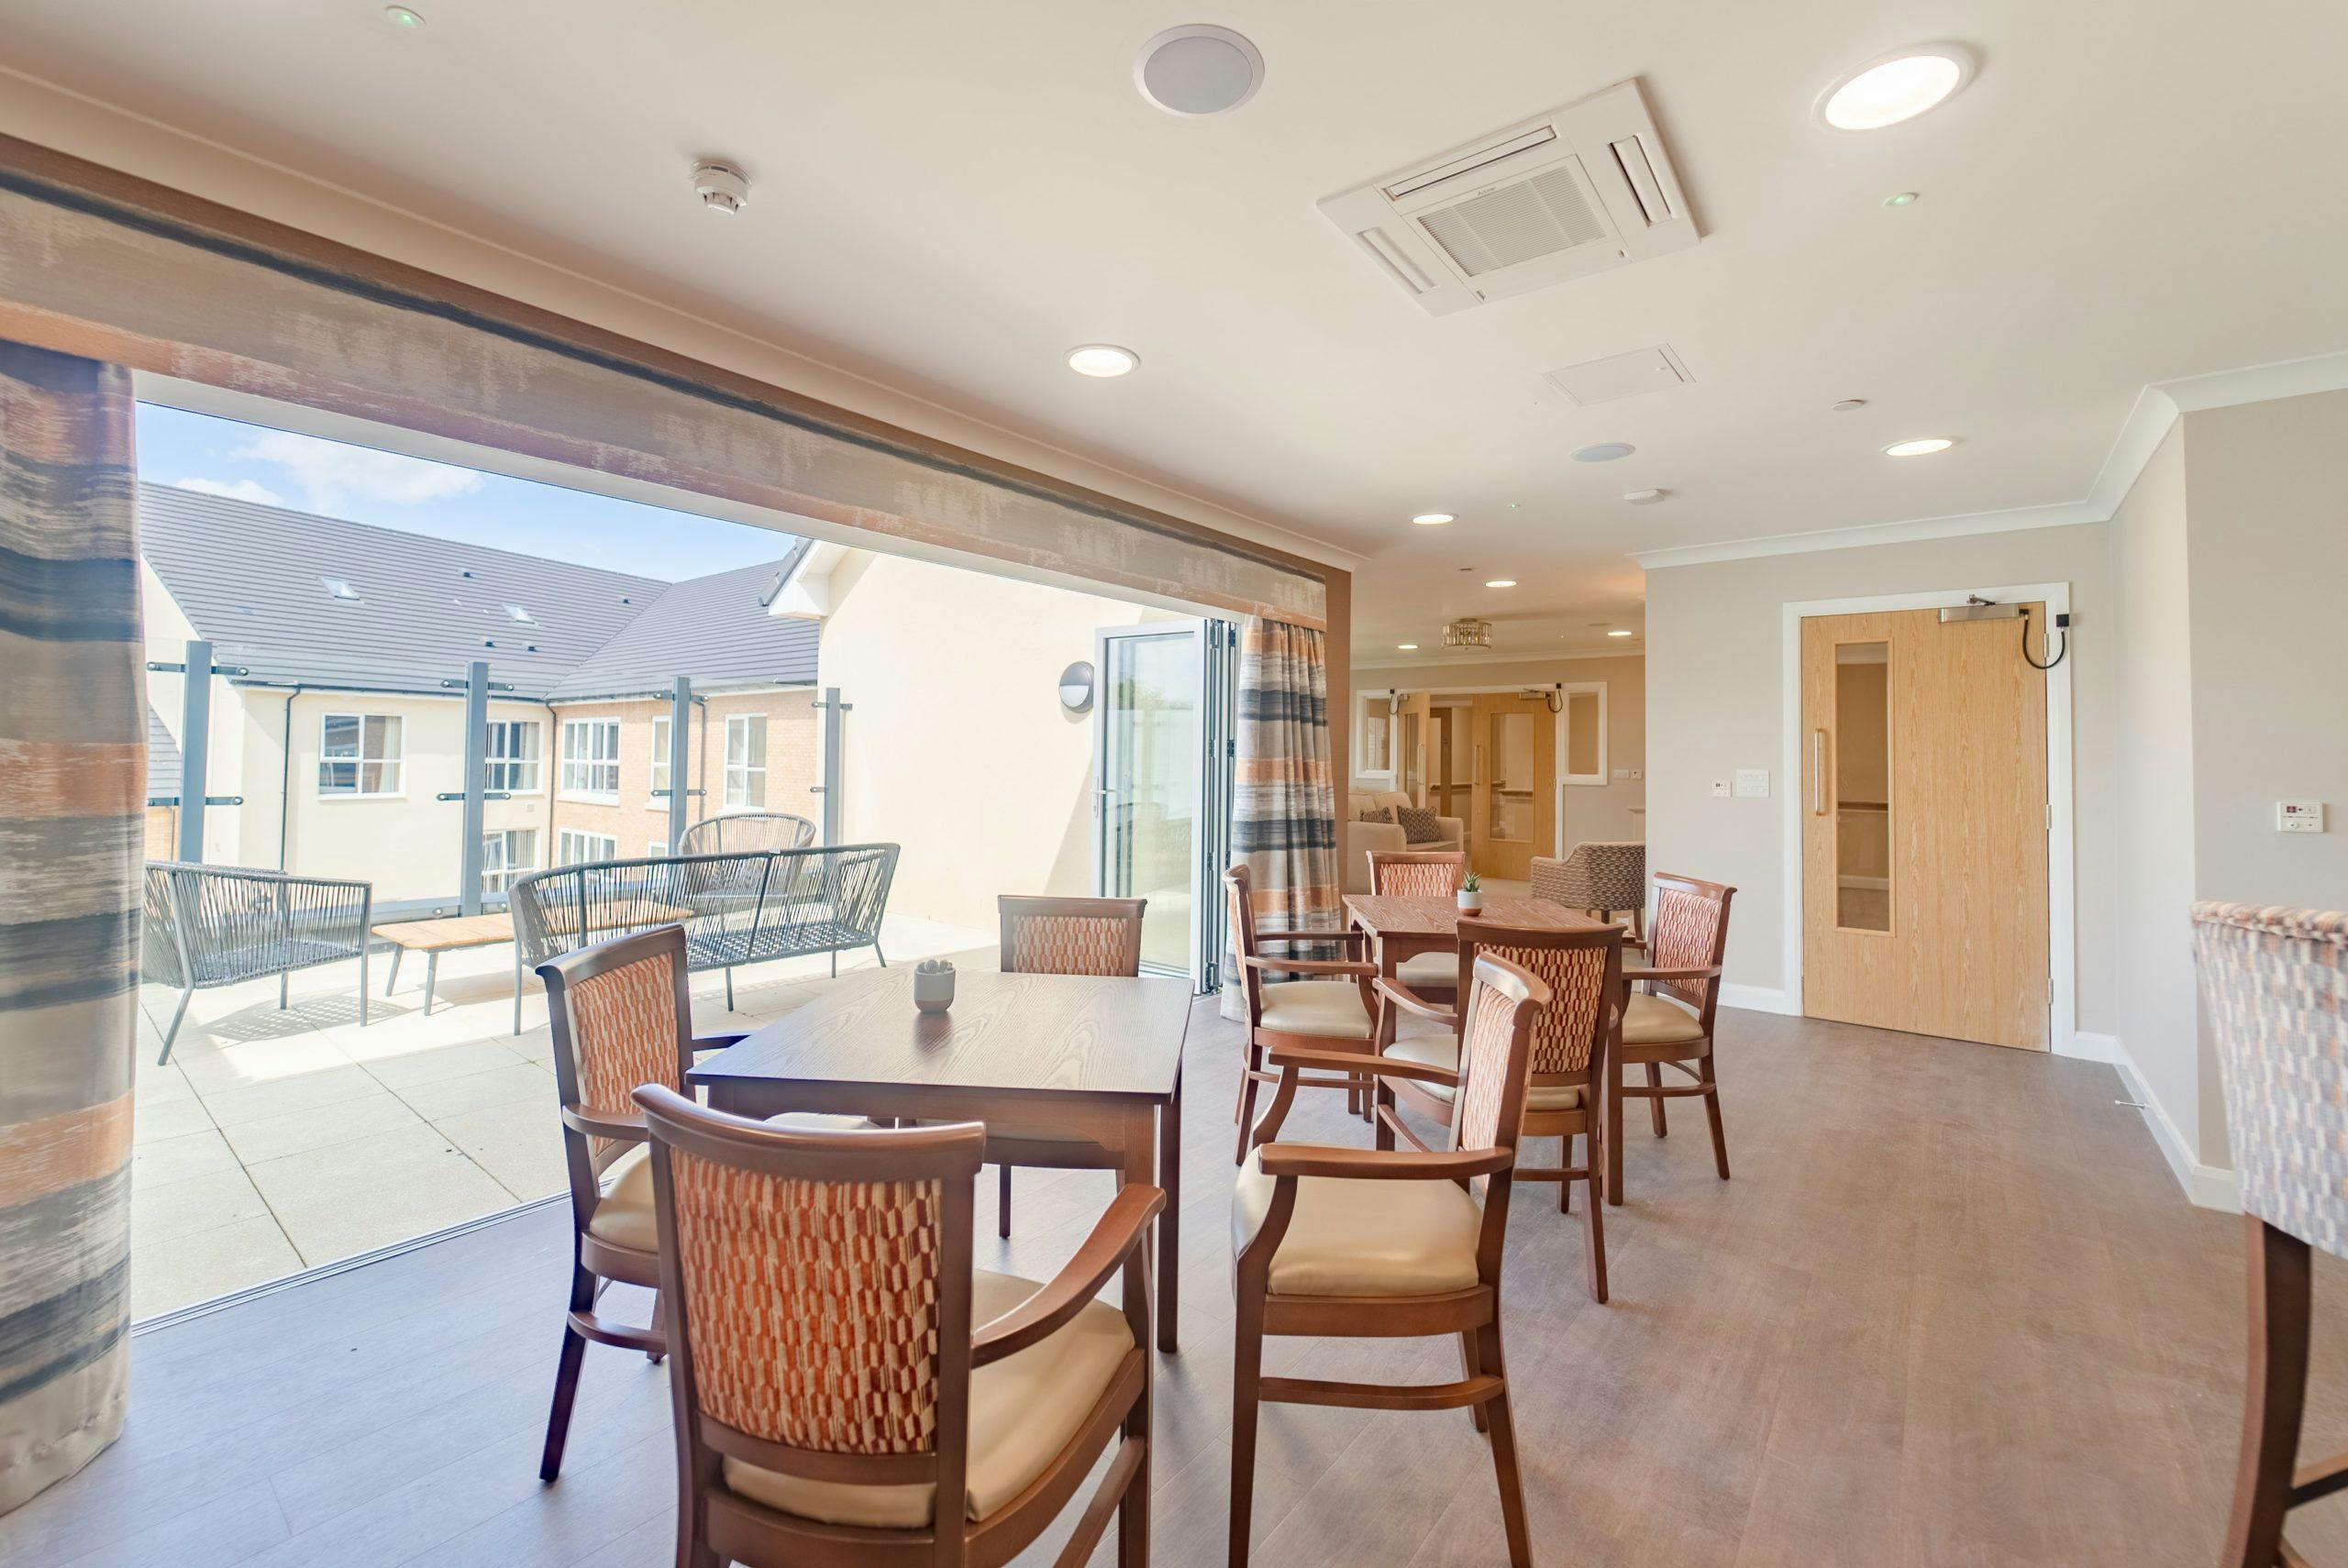 Dining room of Halmer Court care home in Spalding, Lincolshire